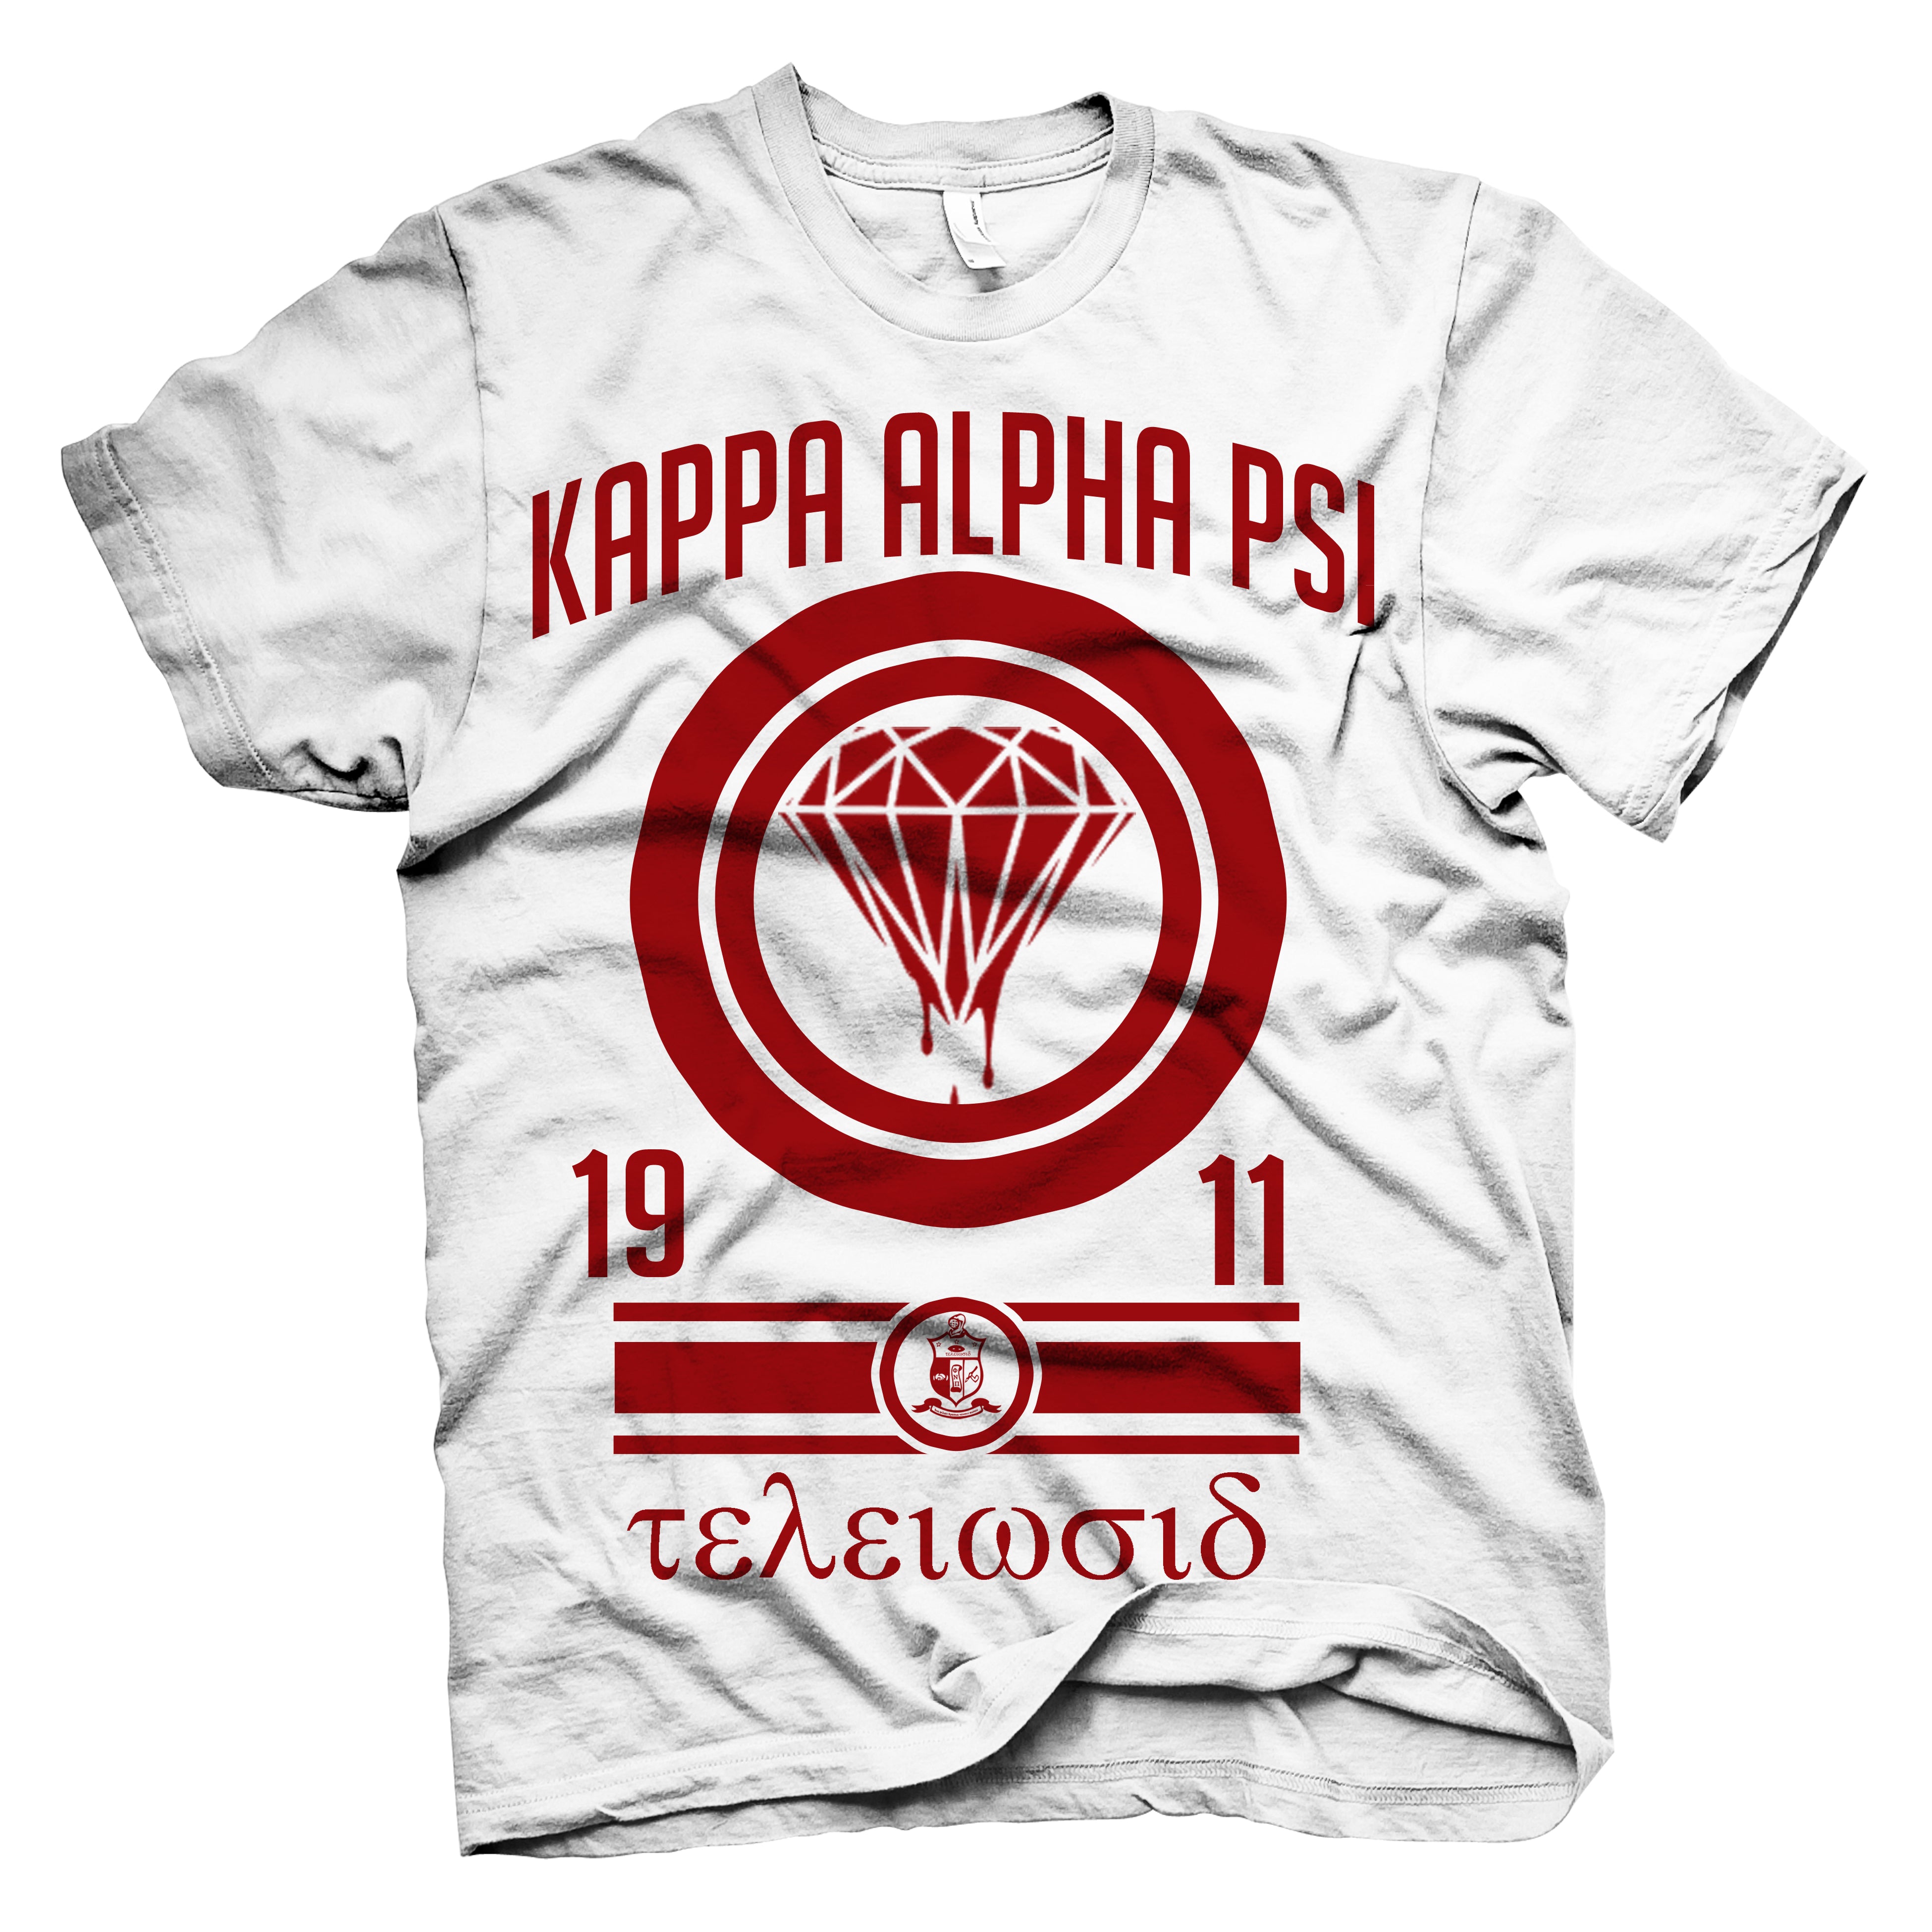 Kappa Alpha Psi WEEKEND – Clothing T-shirt Deference